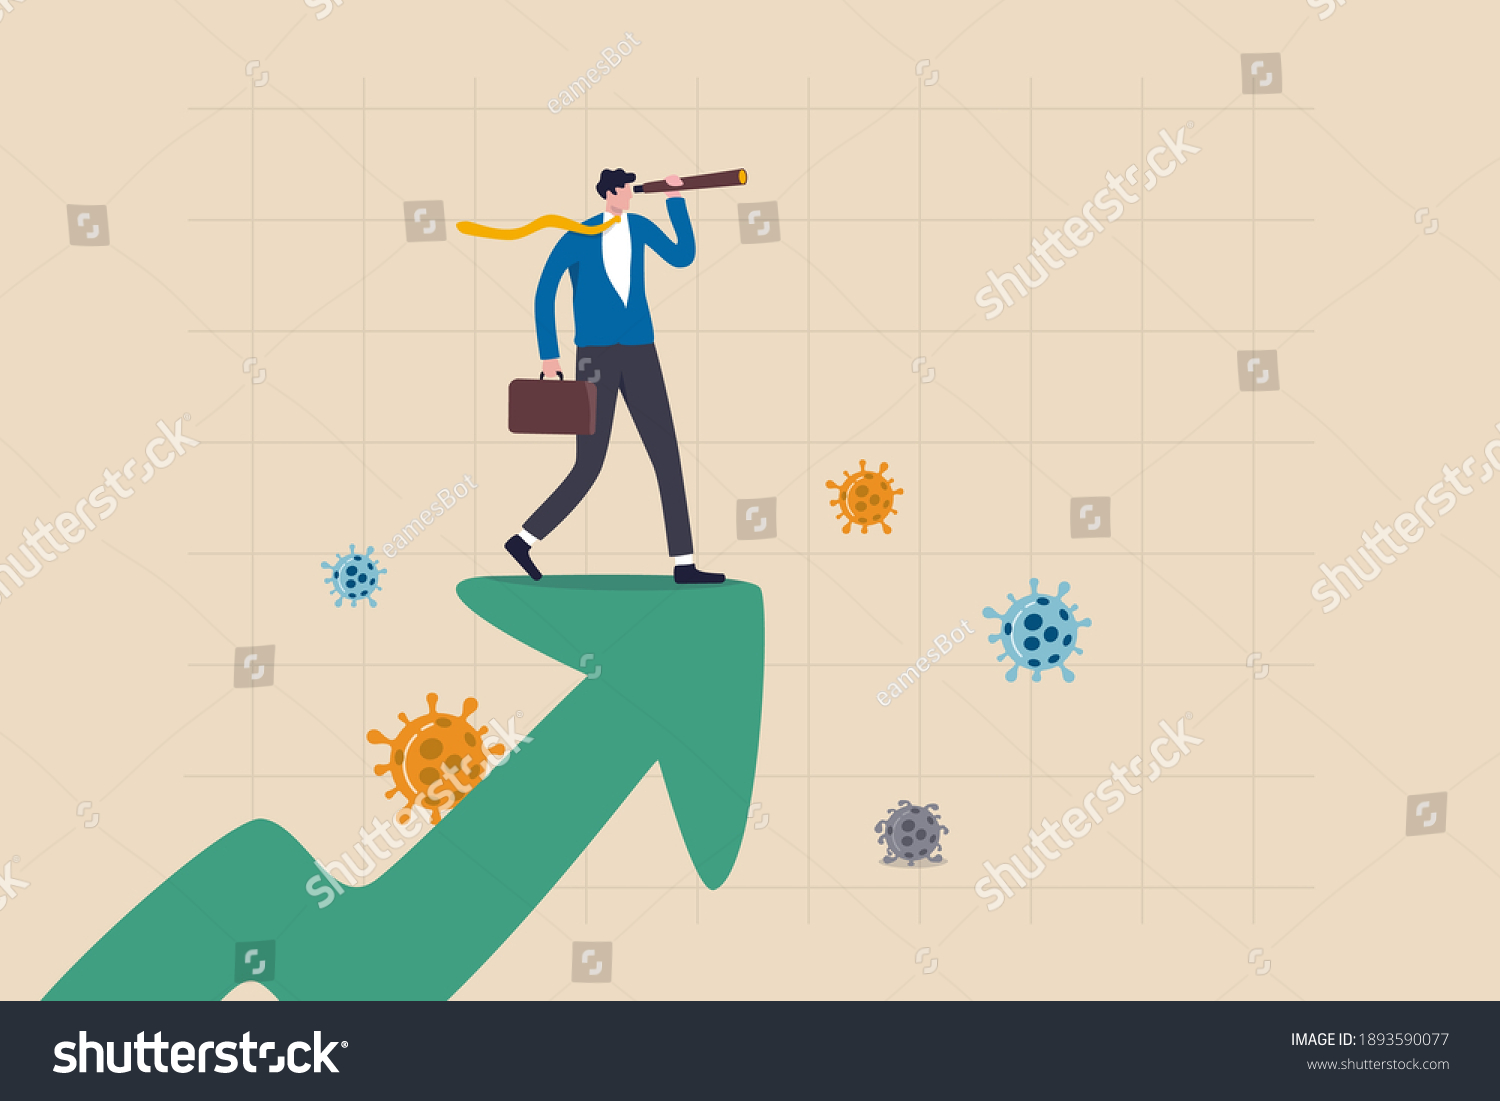 SVG of Post pandemic vision, economic outlook after Coronavirus COVID-19 crisis concept, smart businessman standing on upward rising growth graph using telescope to see the way forward with virus pathogen. svg